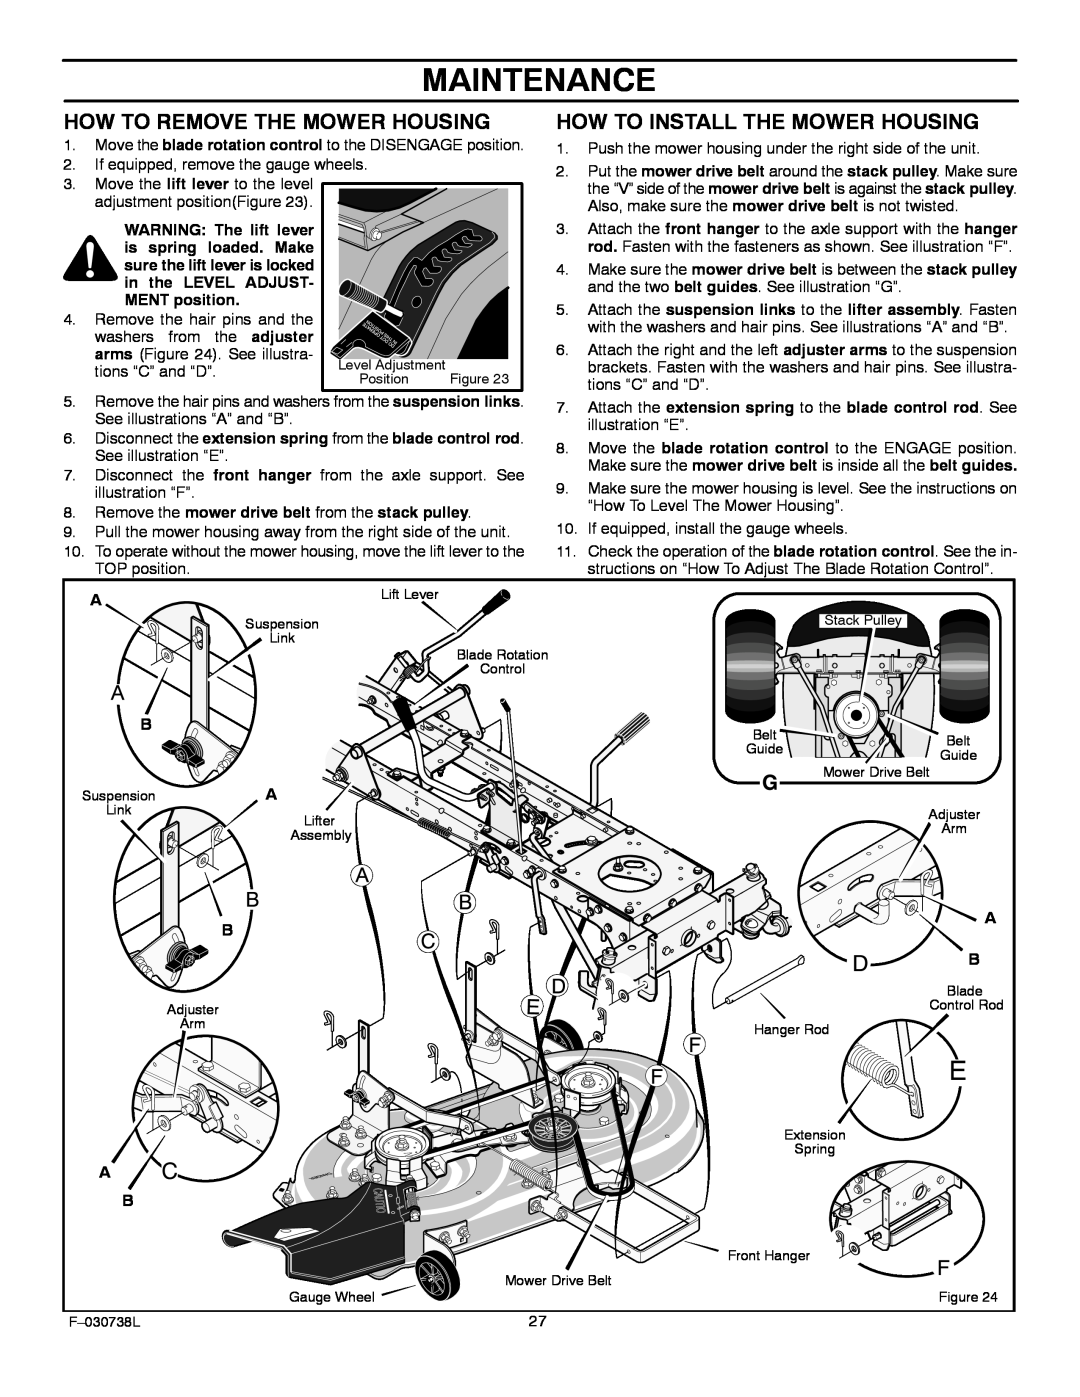 Murray 425603x99A manual Maintenance, How To Remove The Mower Housing, How To Install The Mower Housing 